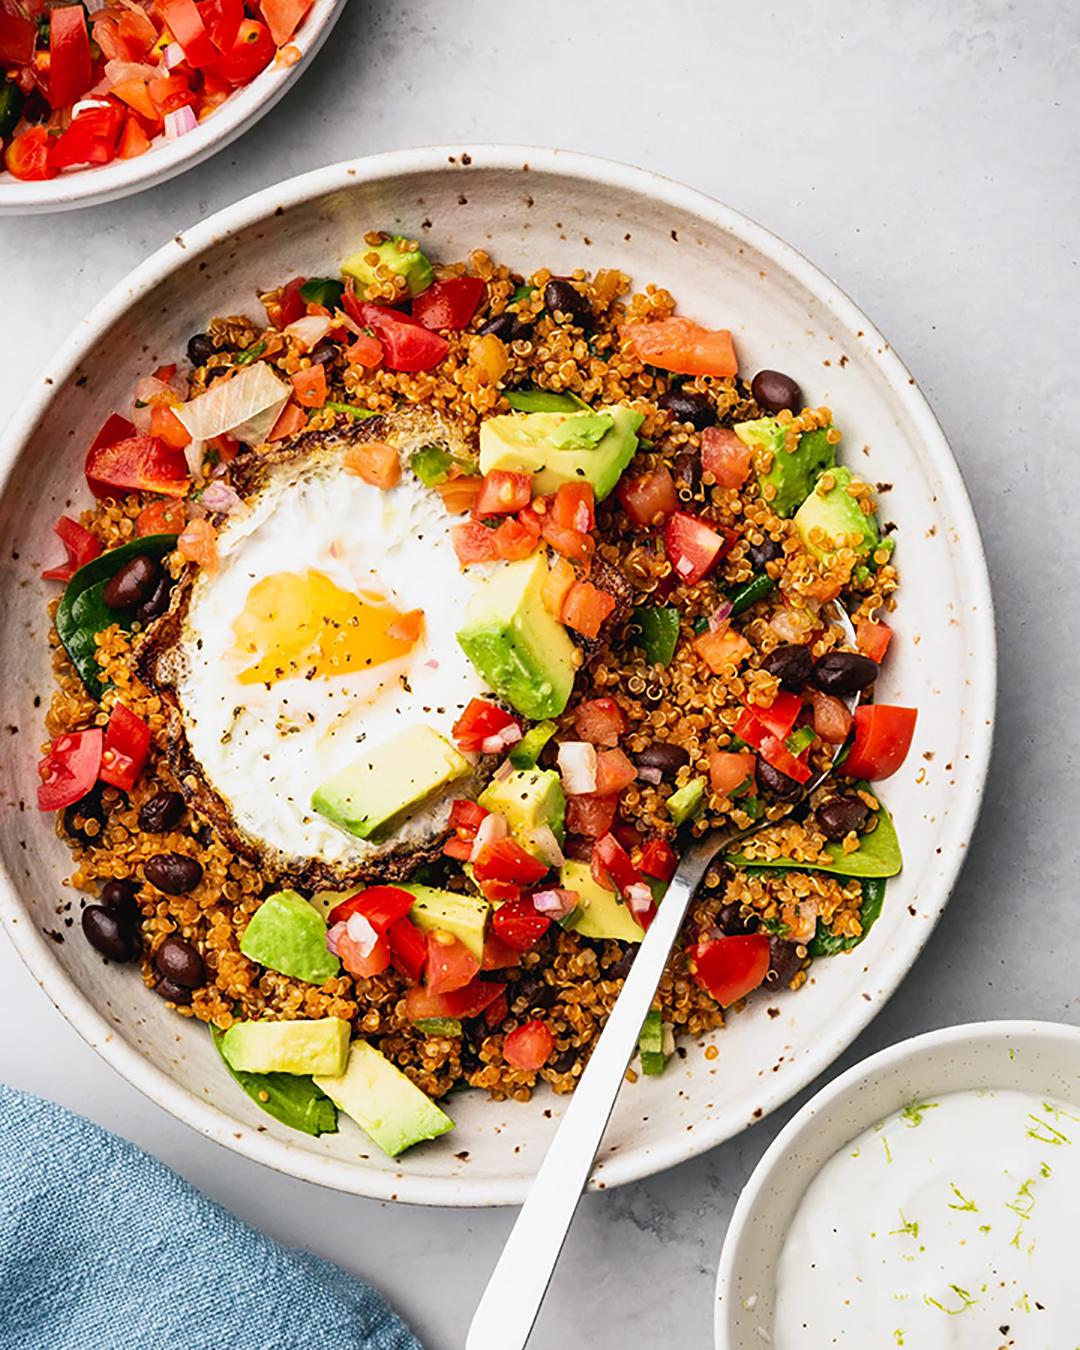 These vegetarian taco bowls swap the ground beef for nutty, protein-packed quinoa. (Shelly Westerhausen/TNS)